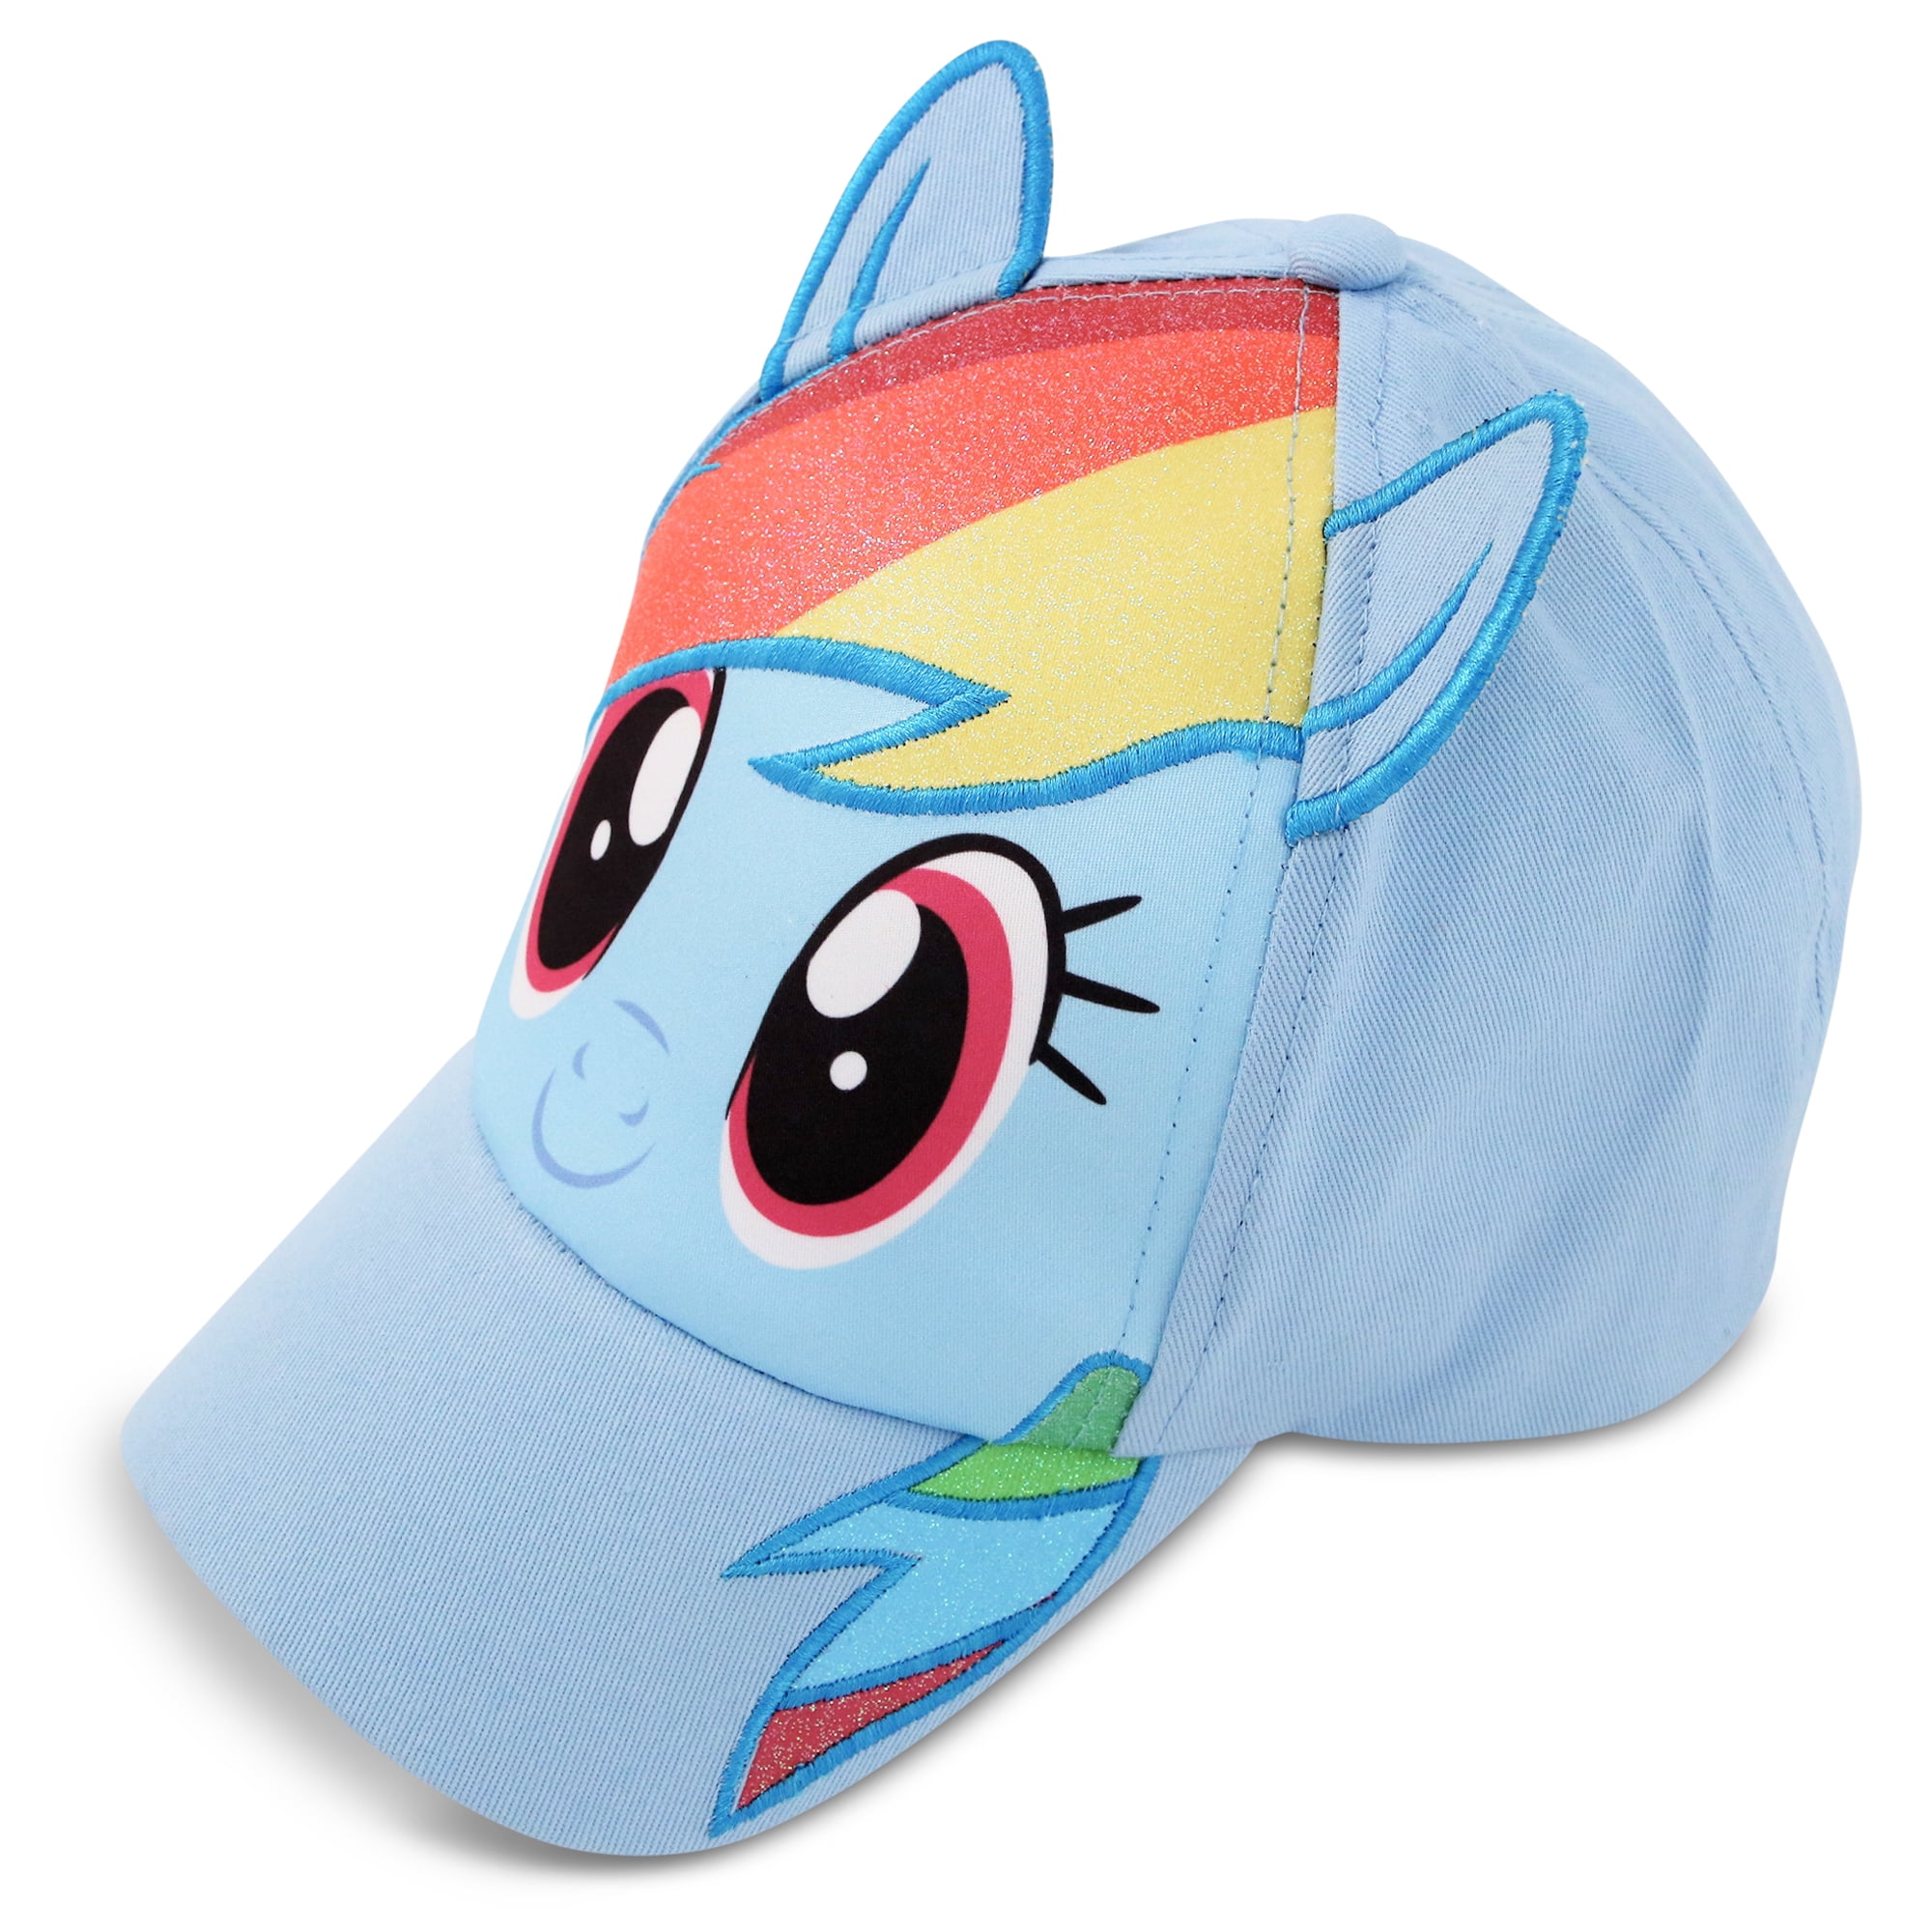 4-12 Years Old C-Ocomelon Childrens Cotton Baseball Cap for Boys and Girls